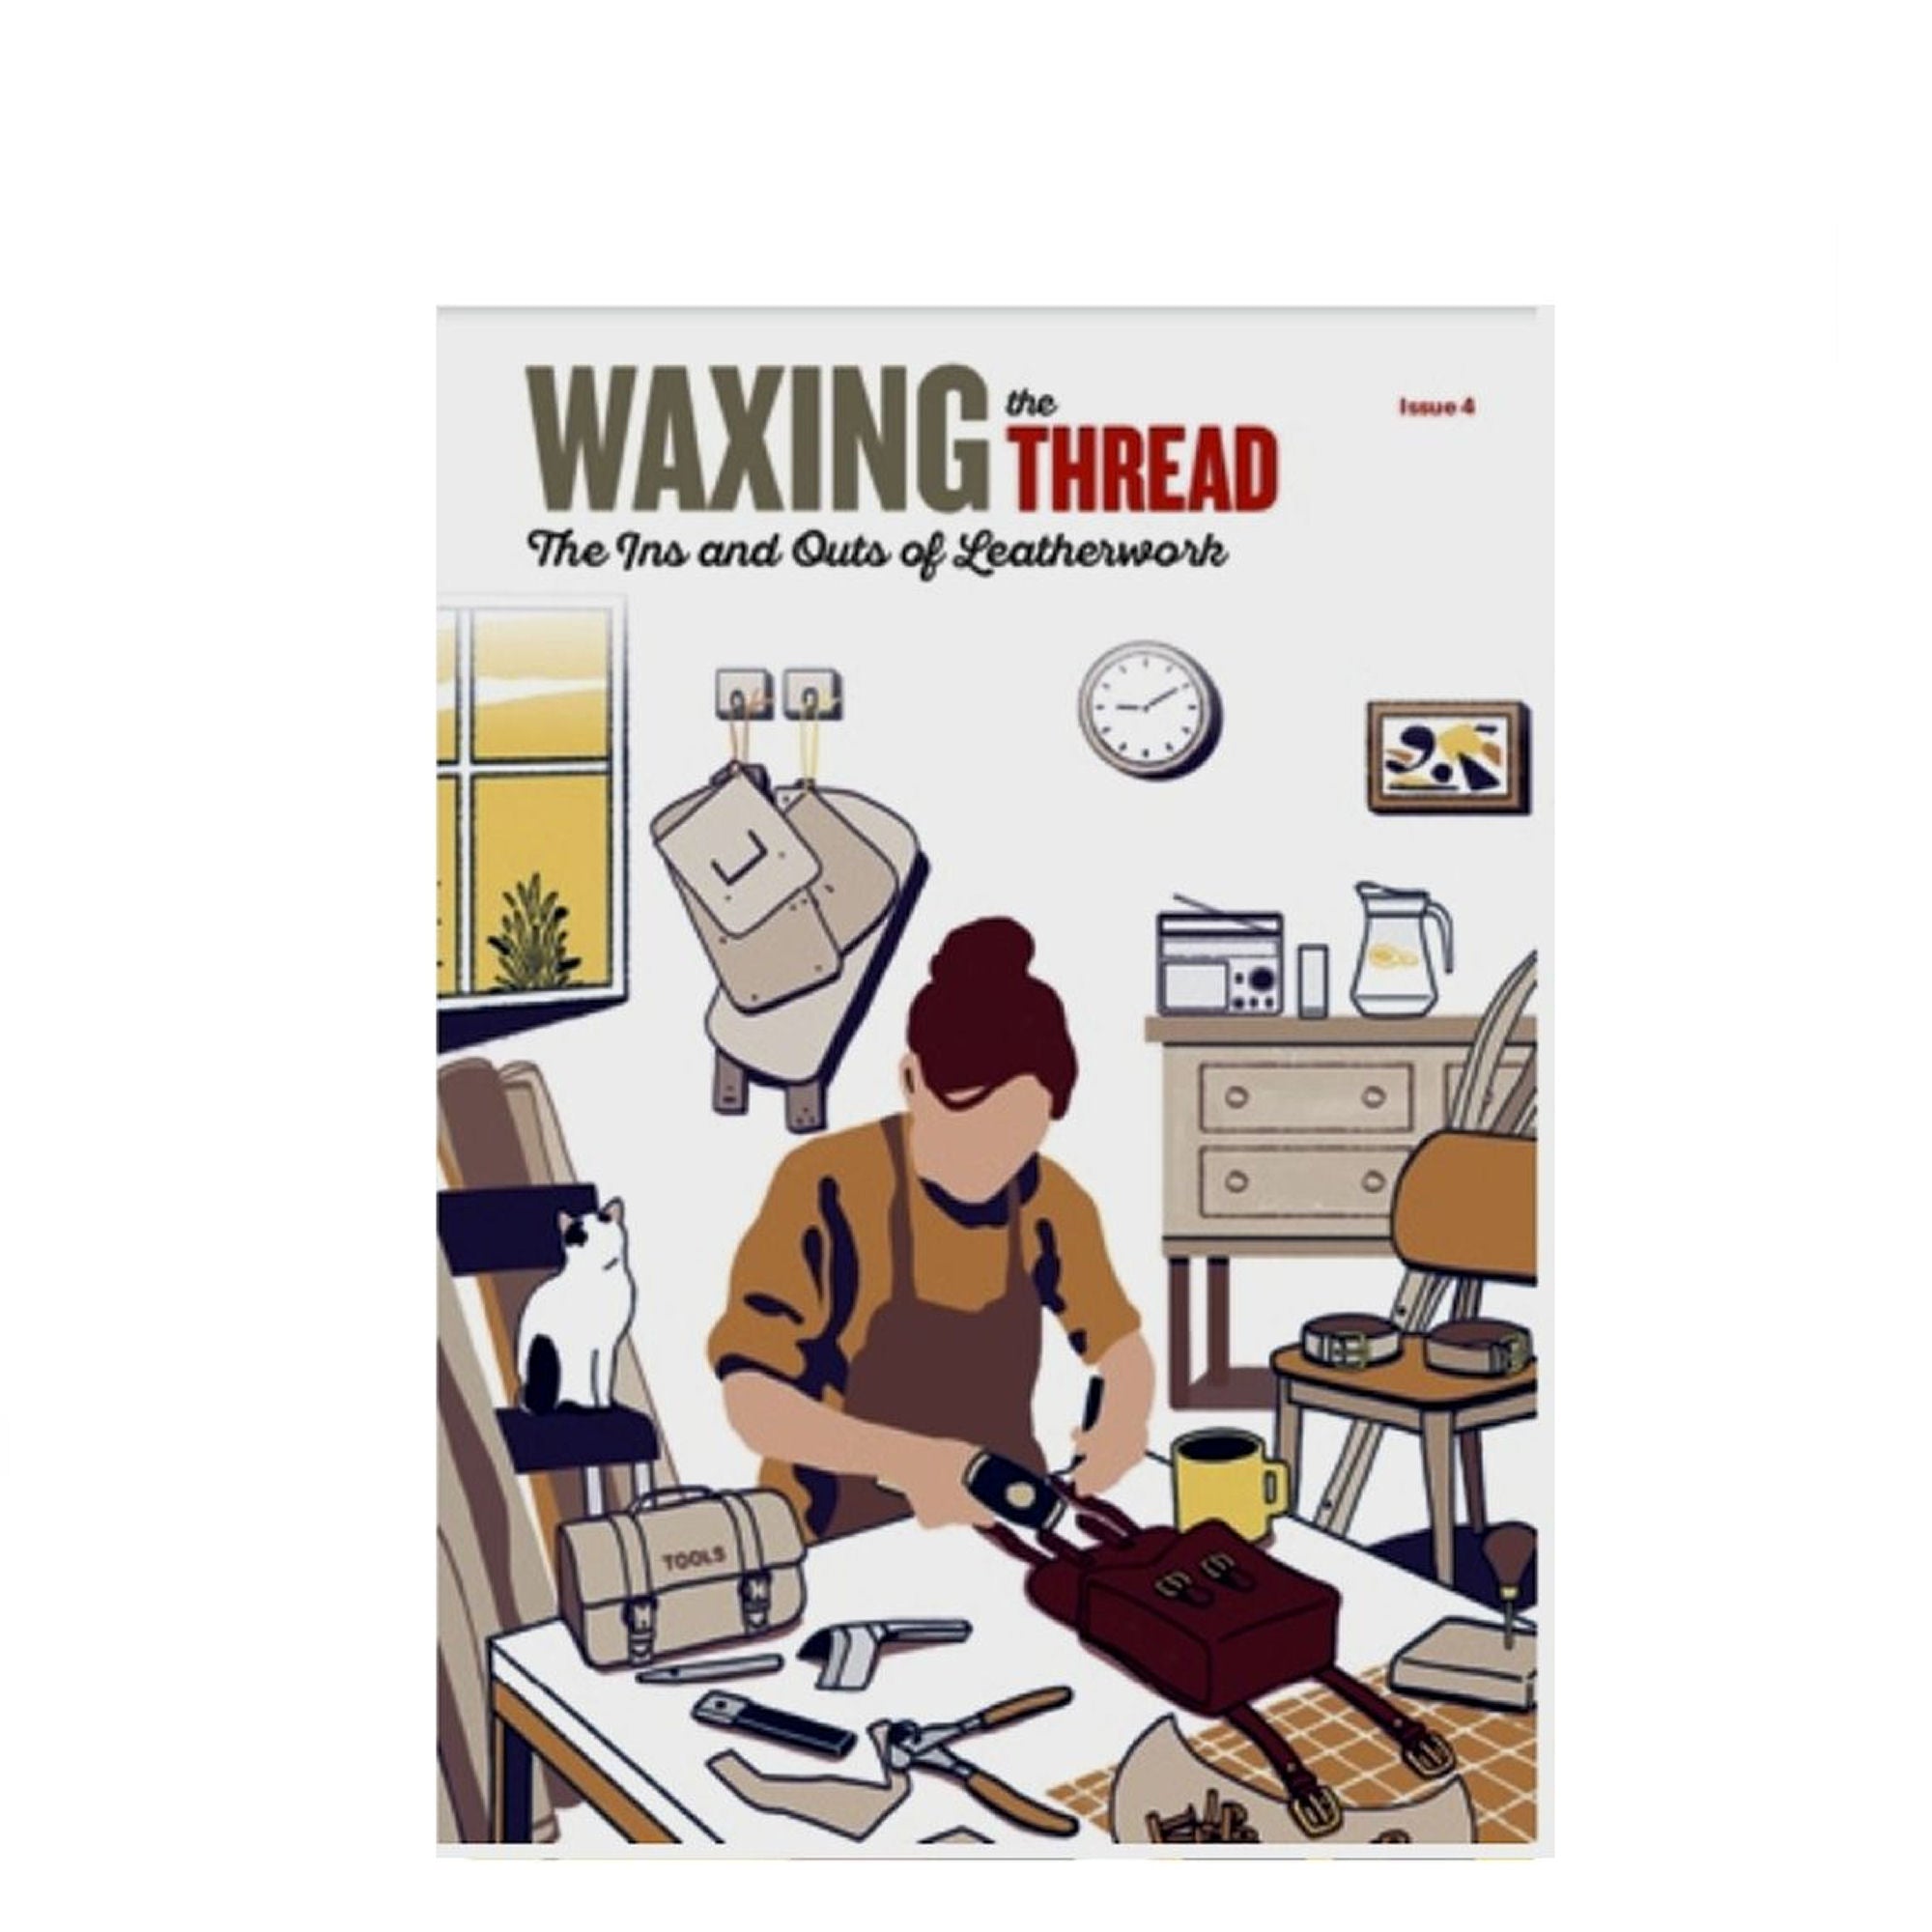 Waxing The Thread - Issue 4 from Identity Leathercraft